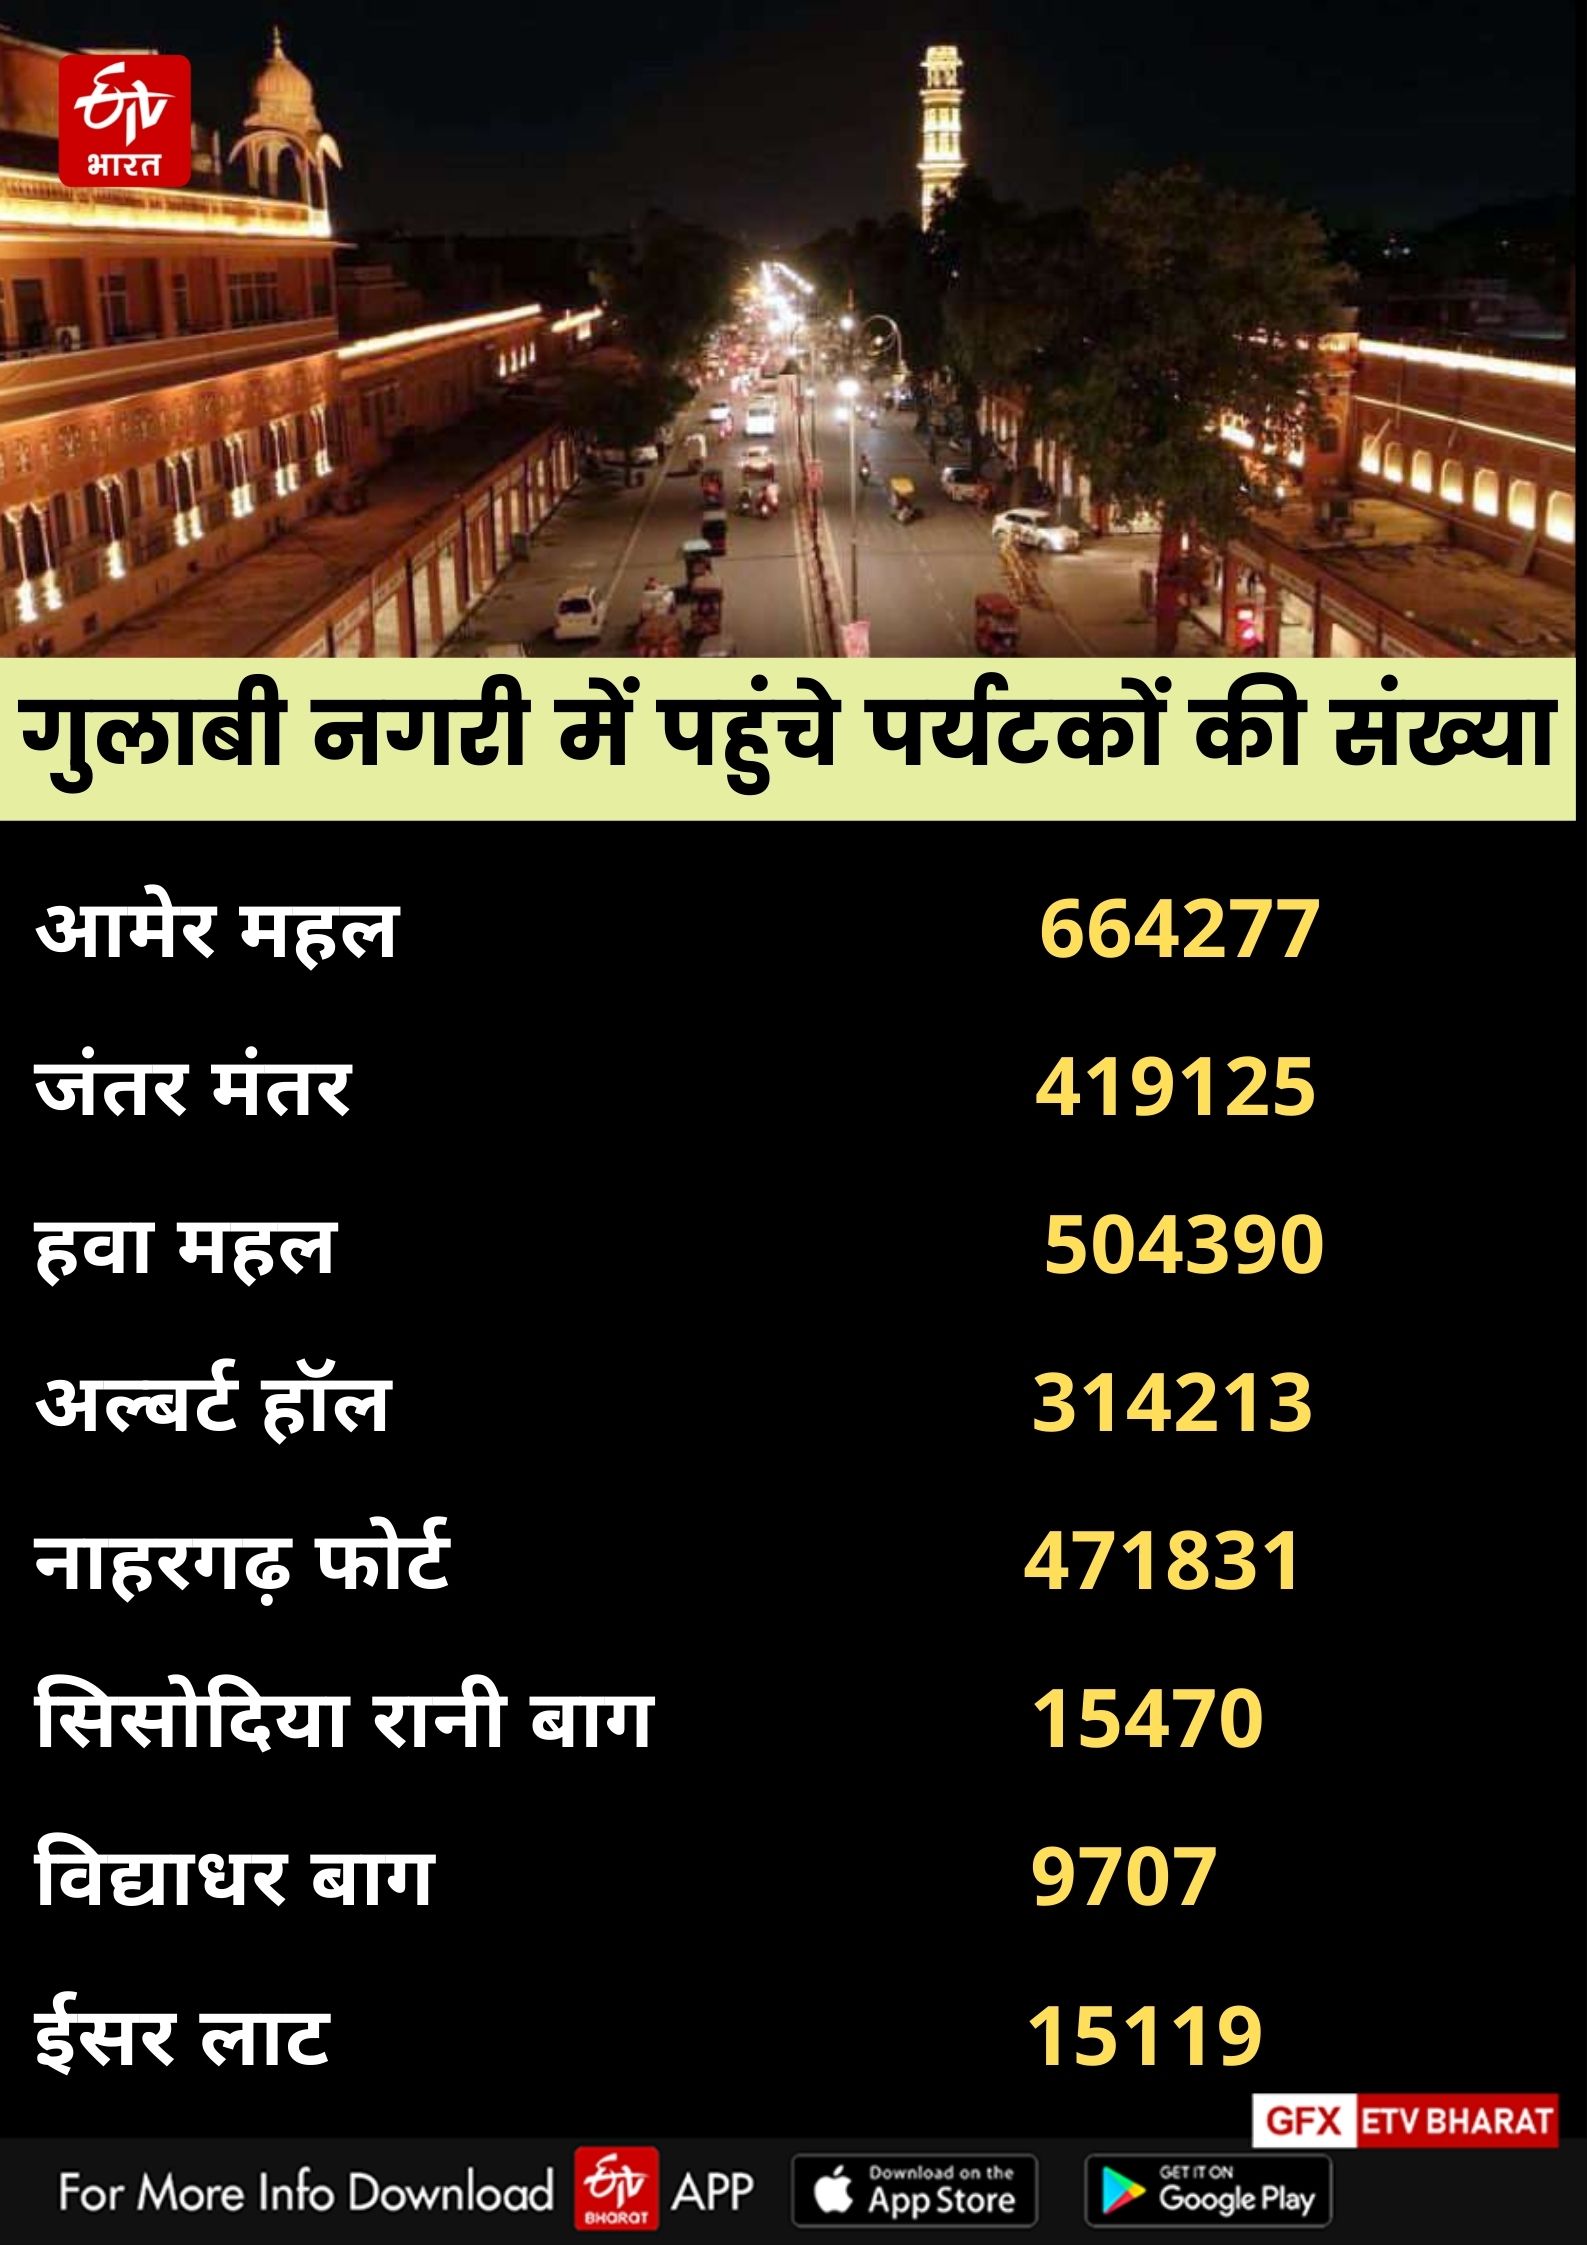 Number of Tourists Reached in Jaipur